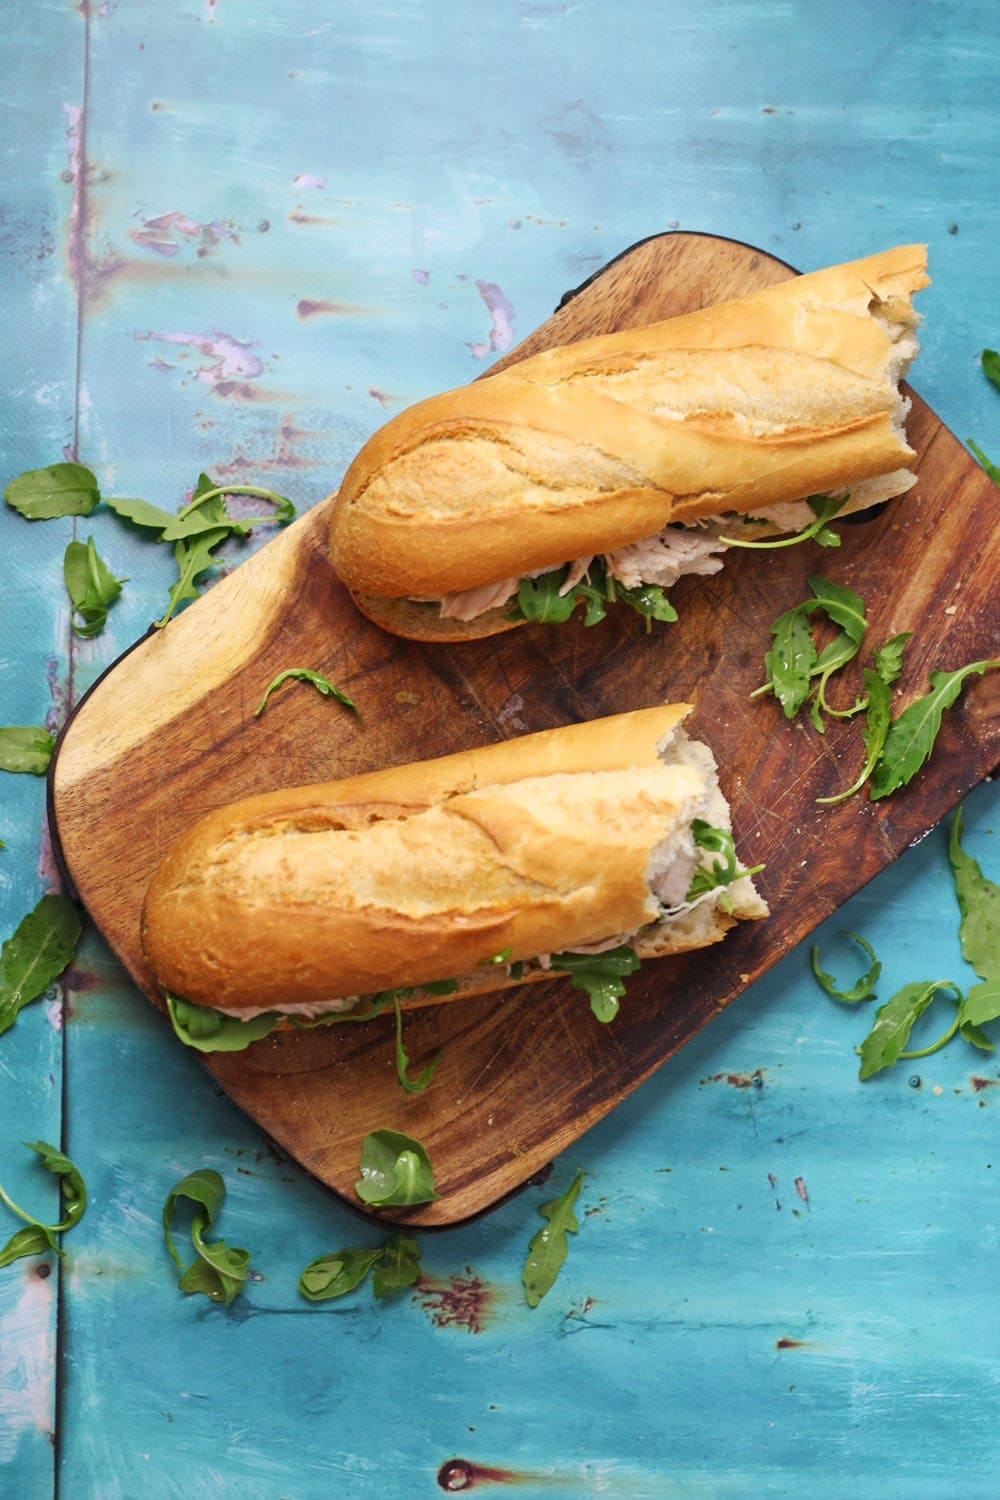 This lime & mint roast chicken sandwich recipe is a delicious weekend treat! Serve drizzled with garlic butter and topped with peppery rocket leaves.